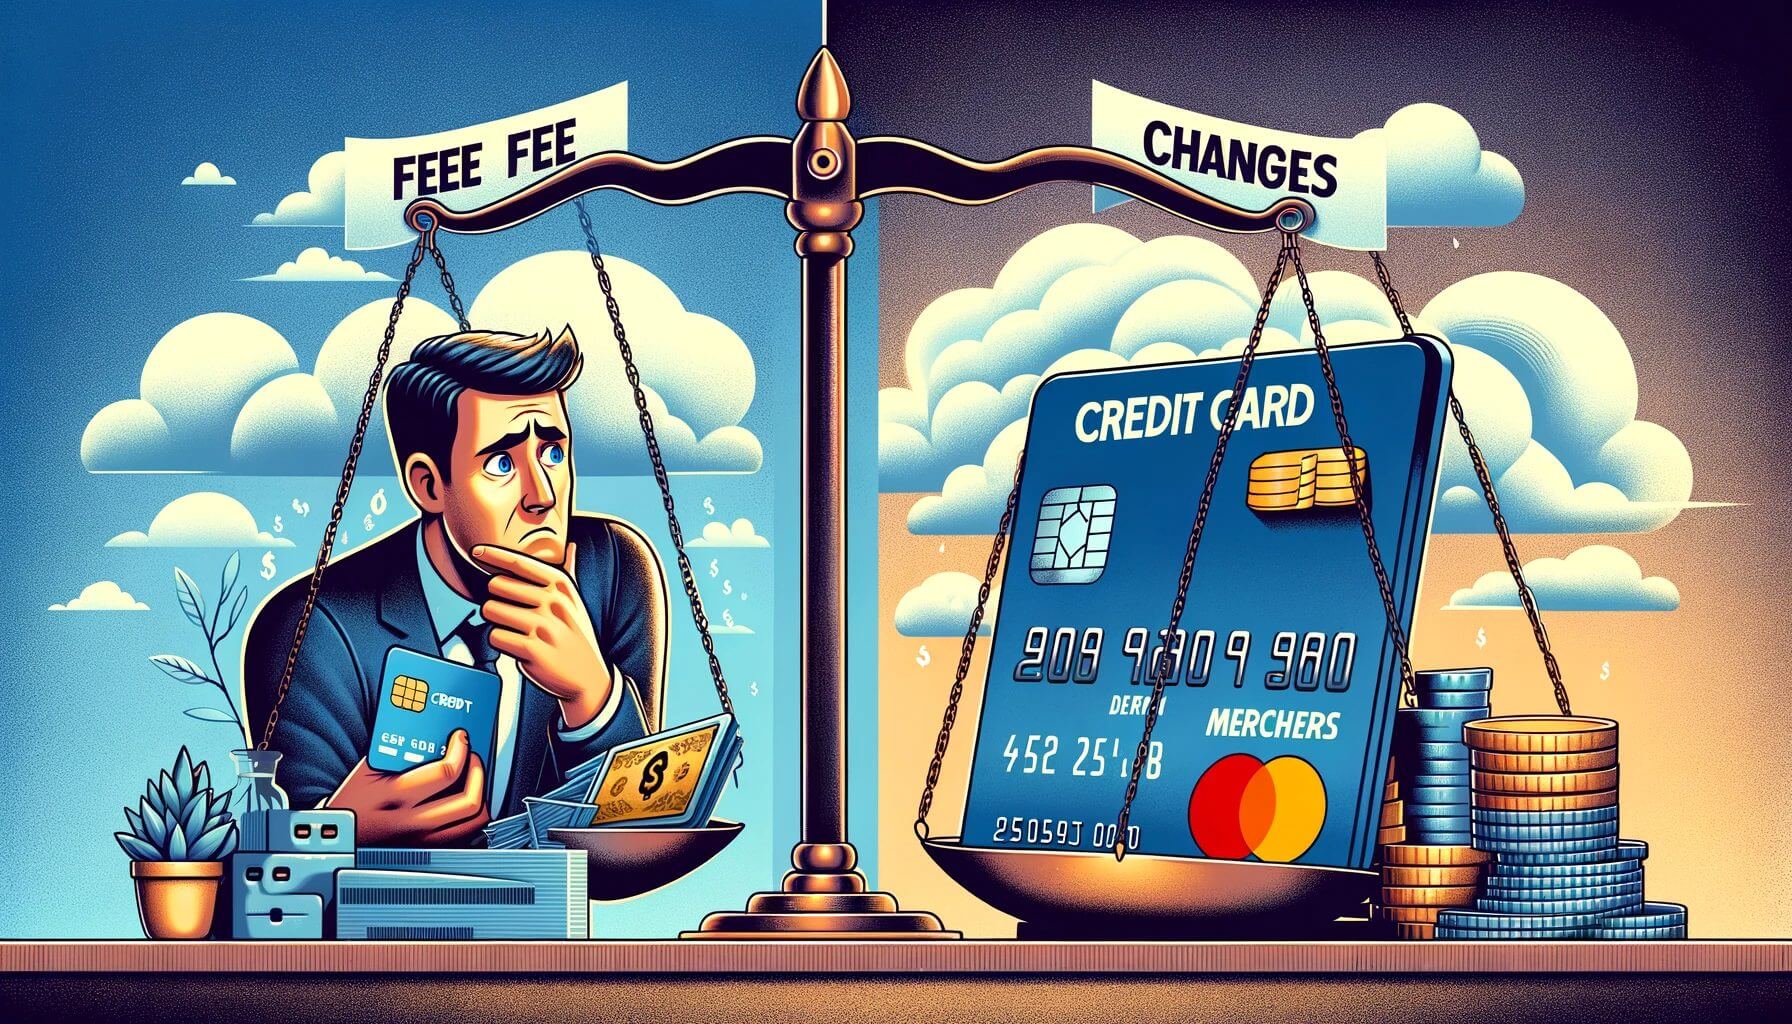 How Will Credit Card Fee Changes Affect Consumer Credit Card Use?